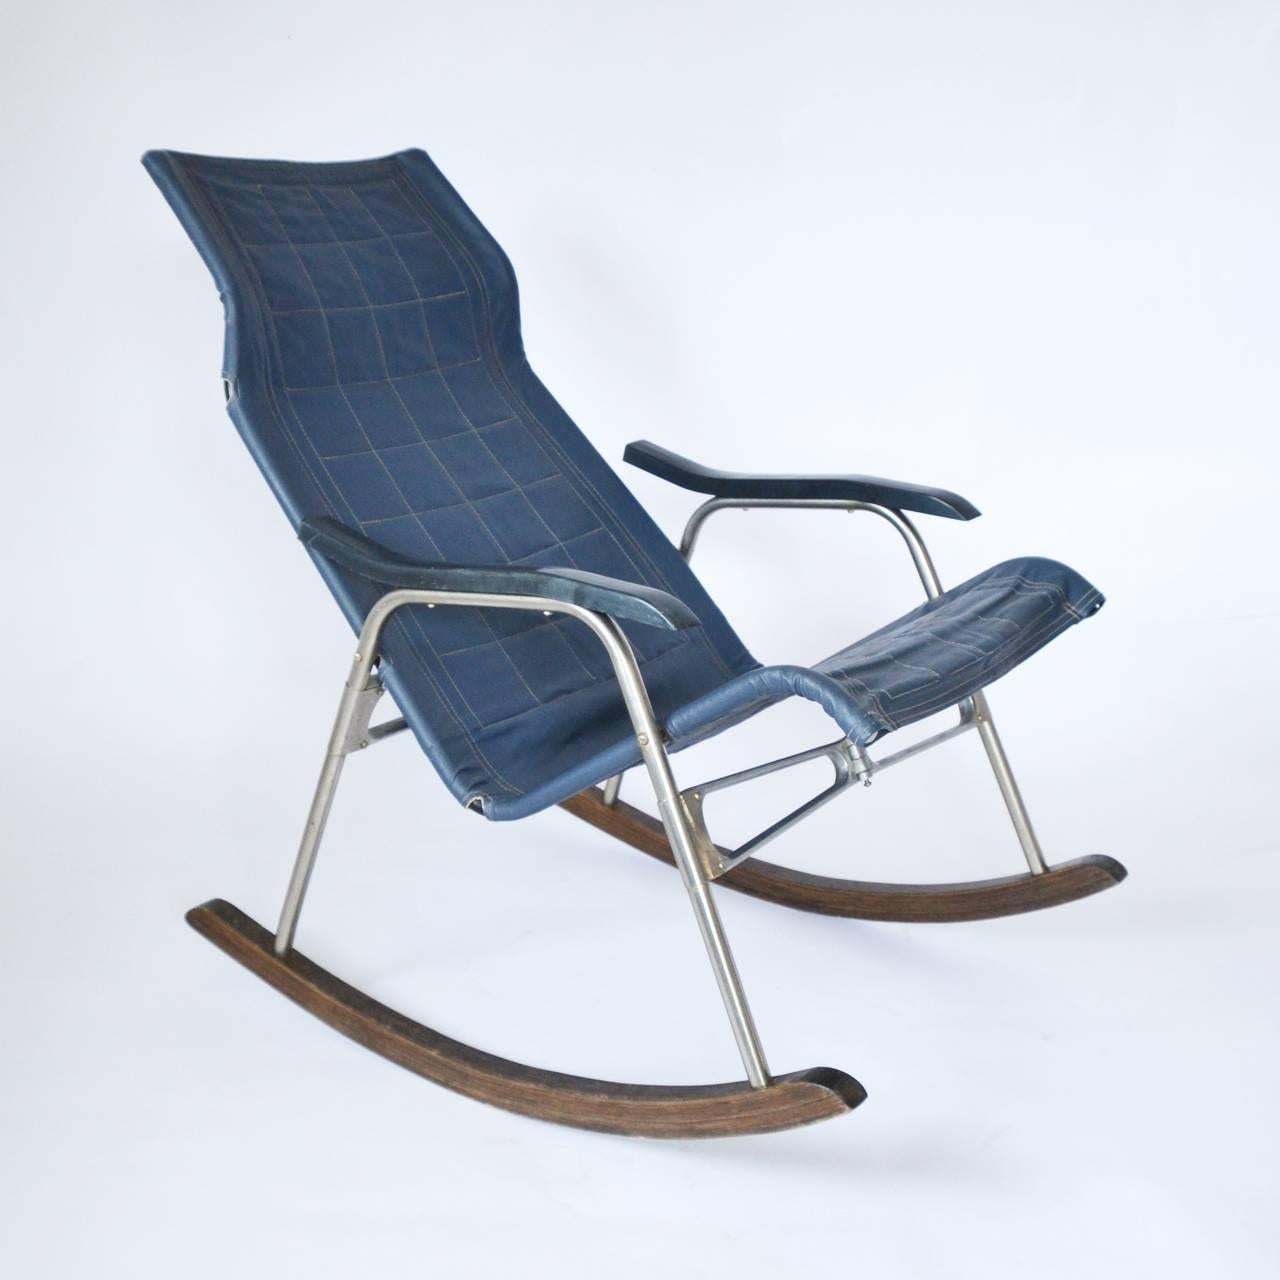 A rare foldable rocking chair designed by Takeshi Nii, Japan, manufactured in Mid-Century in 1950s. This is the brother of the famous NY Chair by Takeshi Nii.
It can be folded in the middle to a width of only 5.5 inch (14 cm). The seat height is